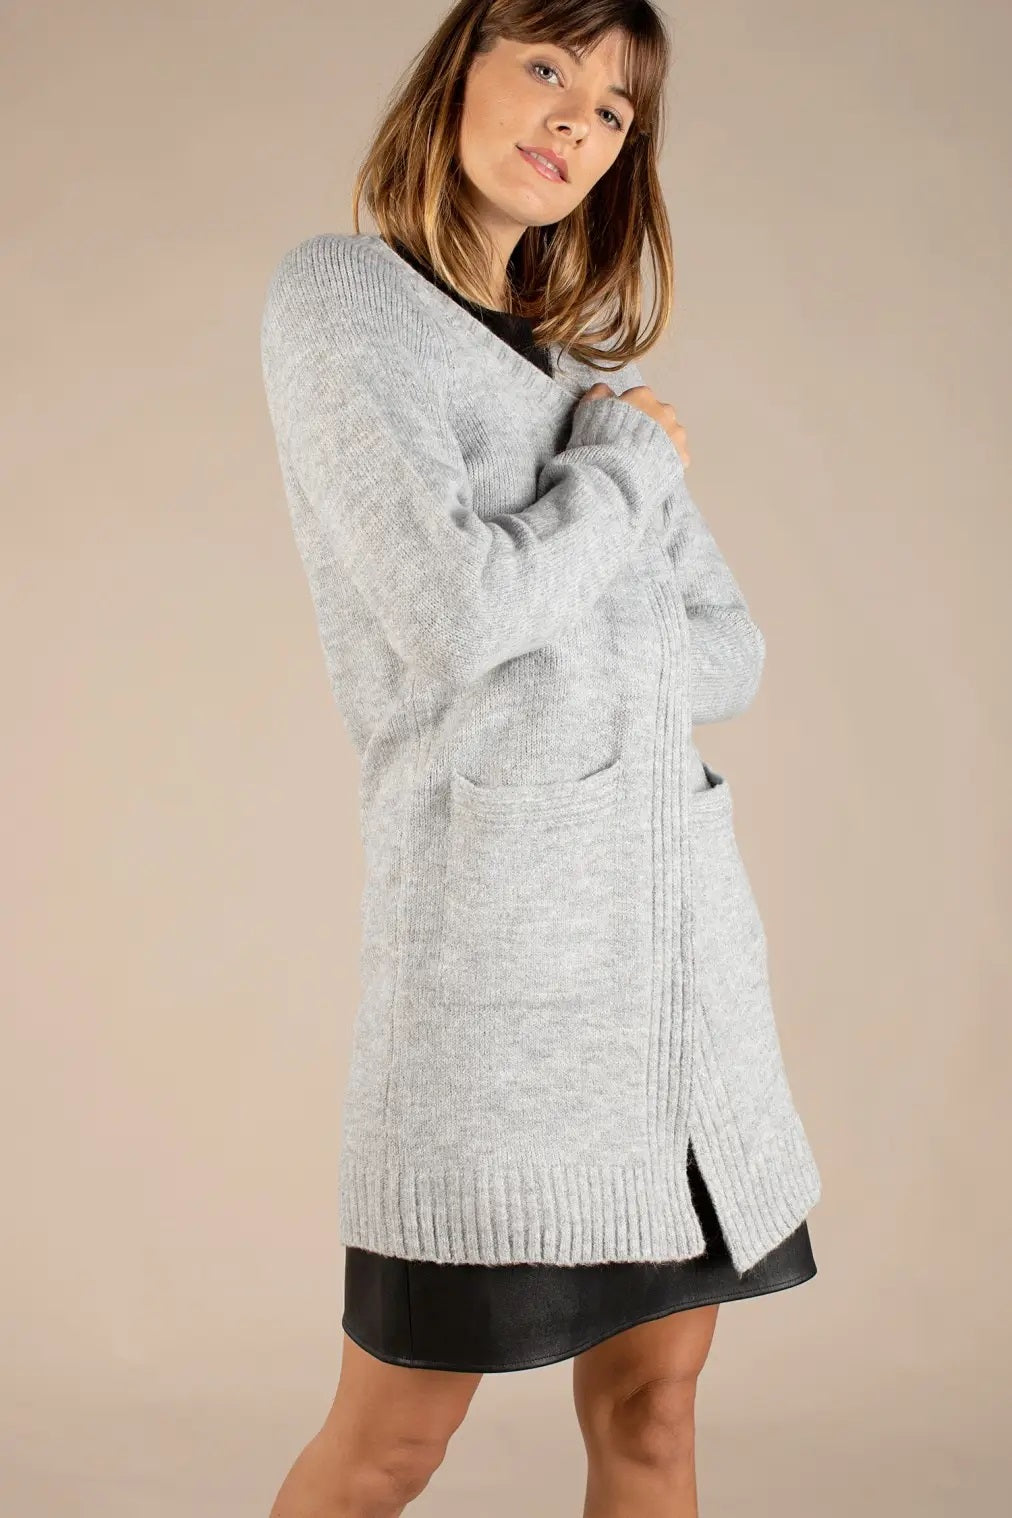 all:row, The Rayna Cardigan Sweater in Heather Grey - Boutique Dandelion